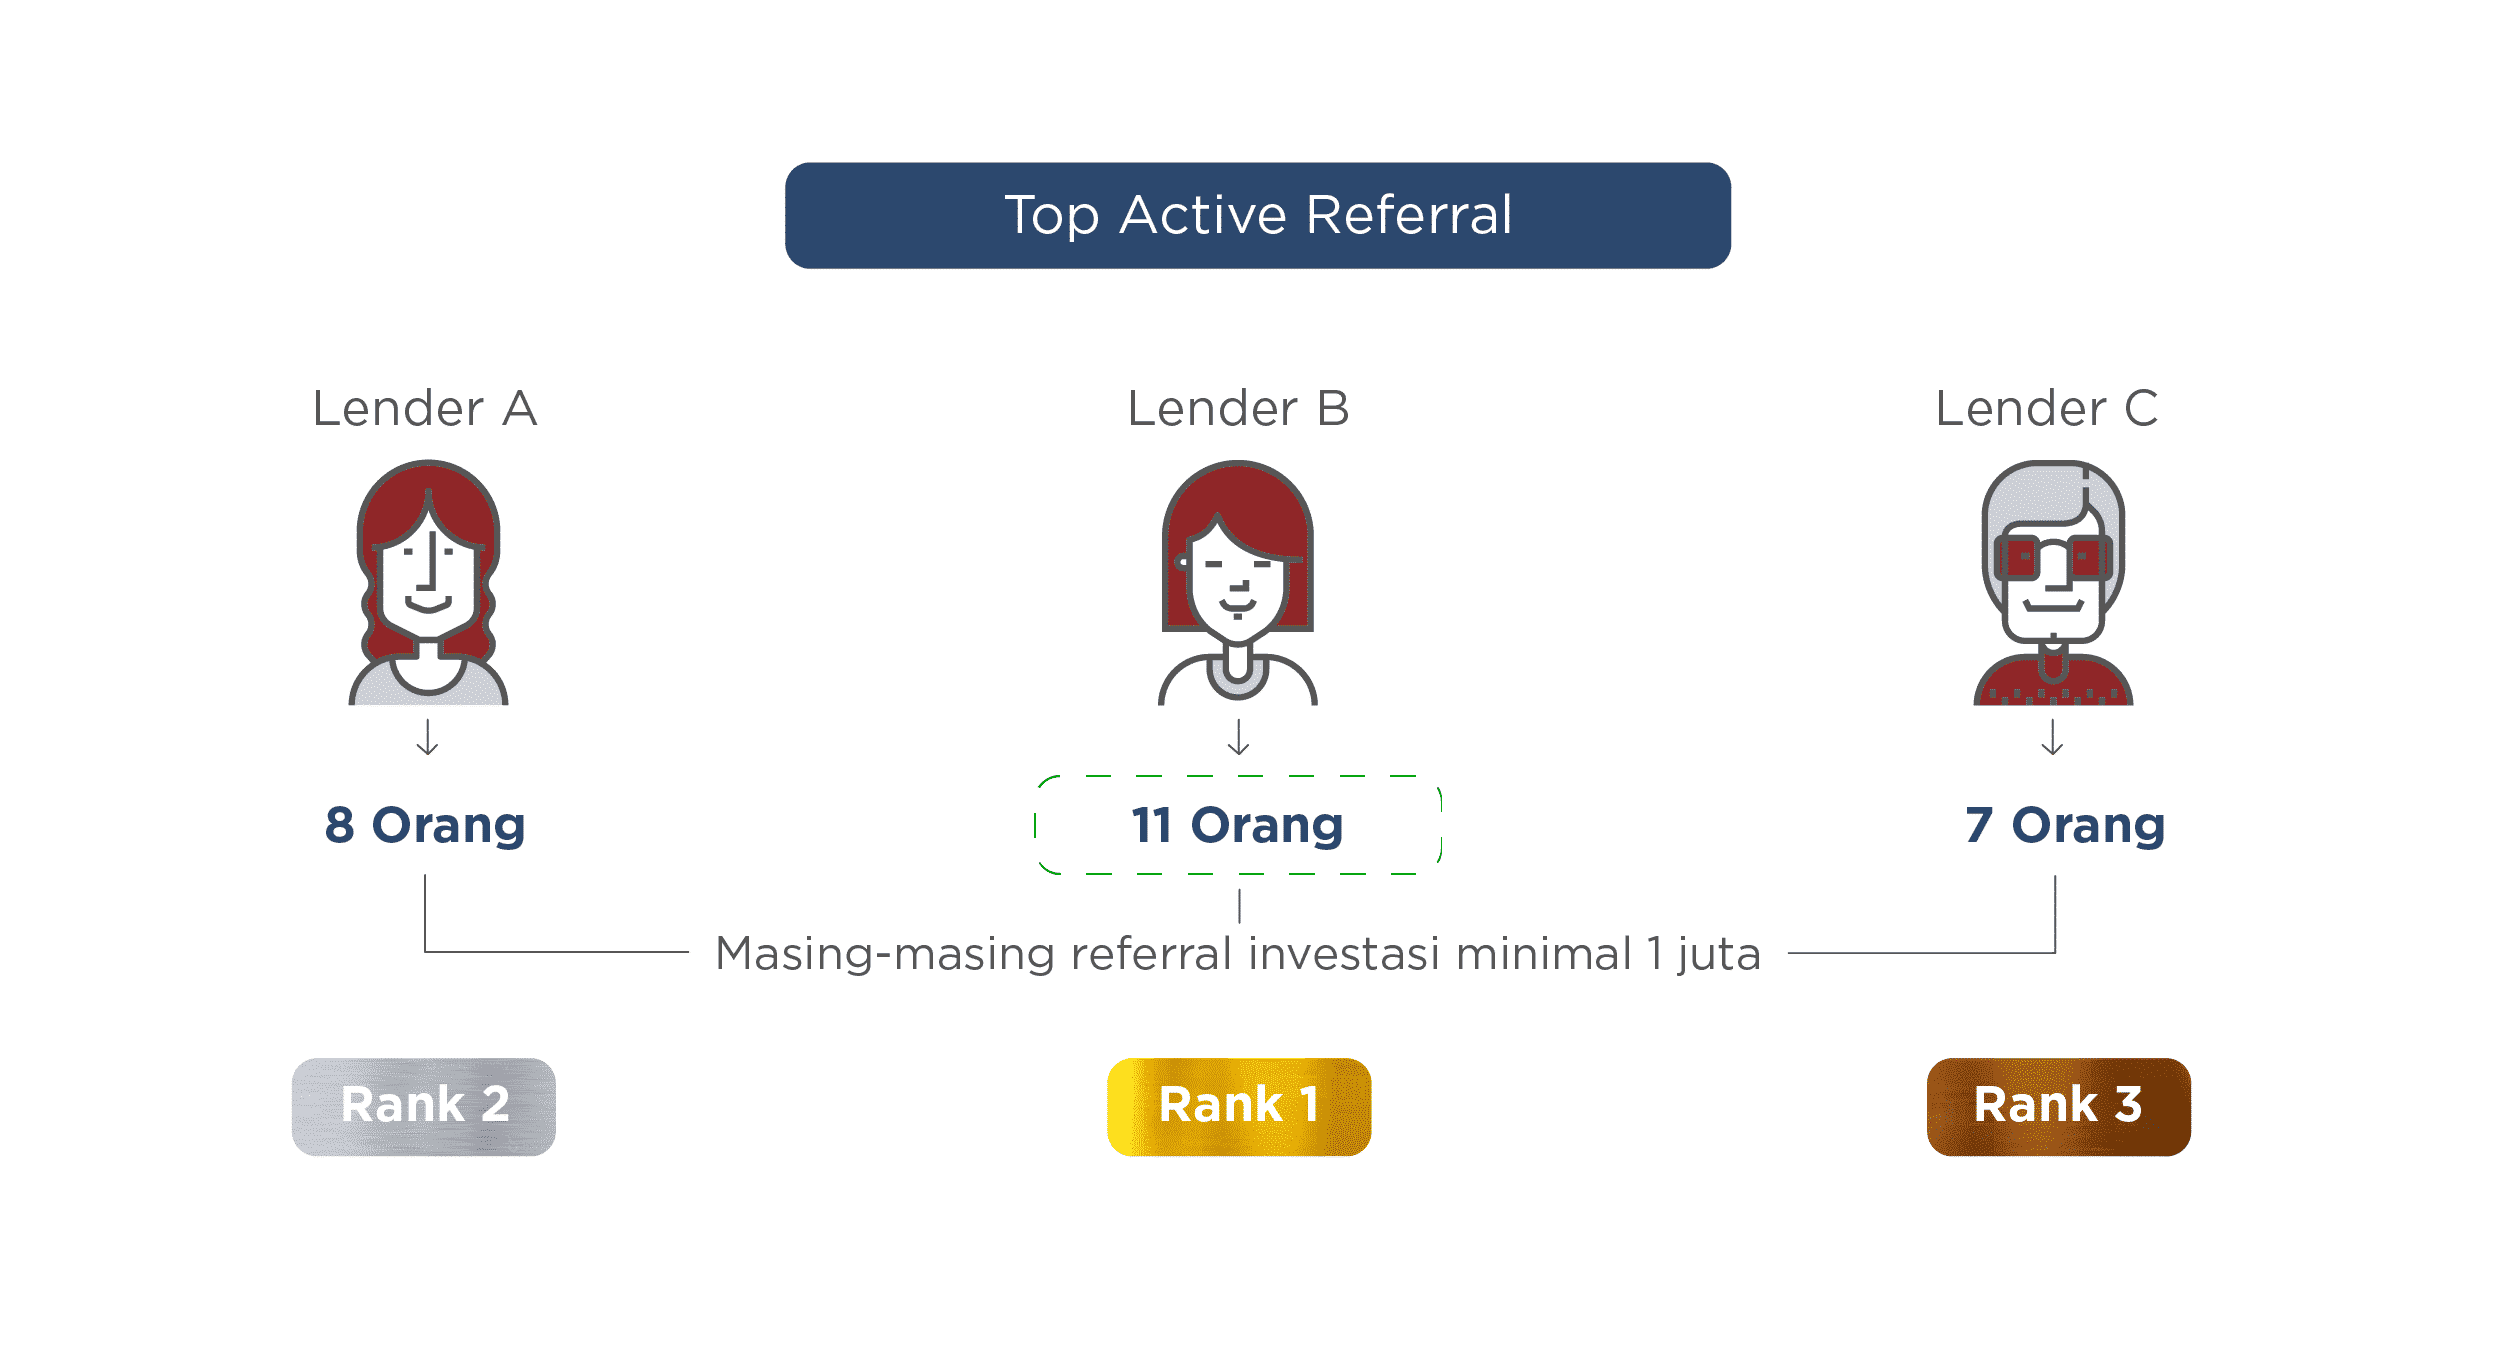 Top Active Referral